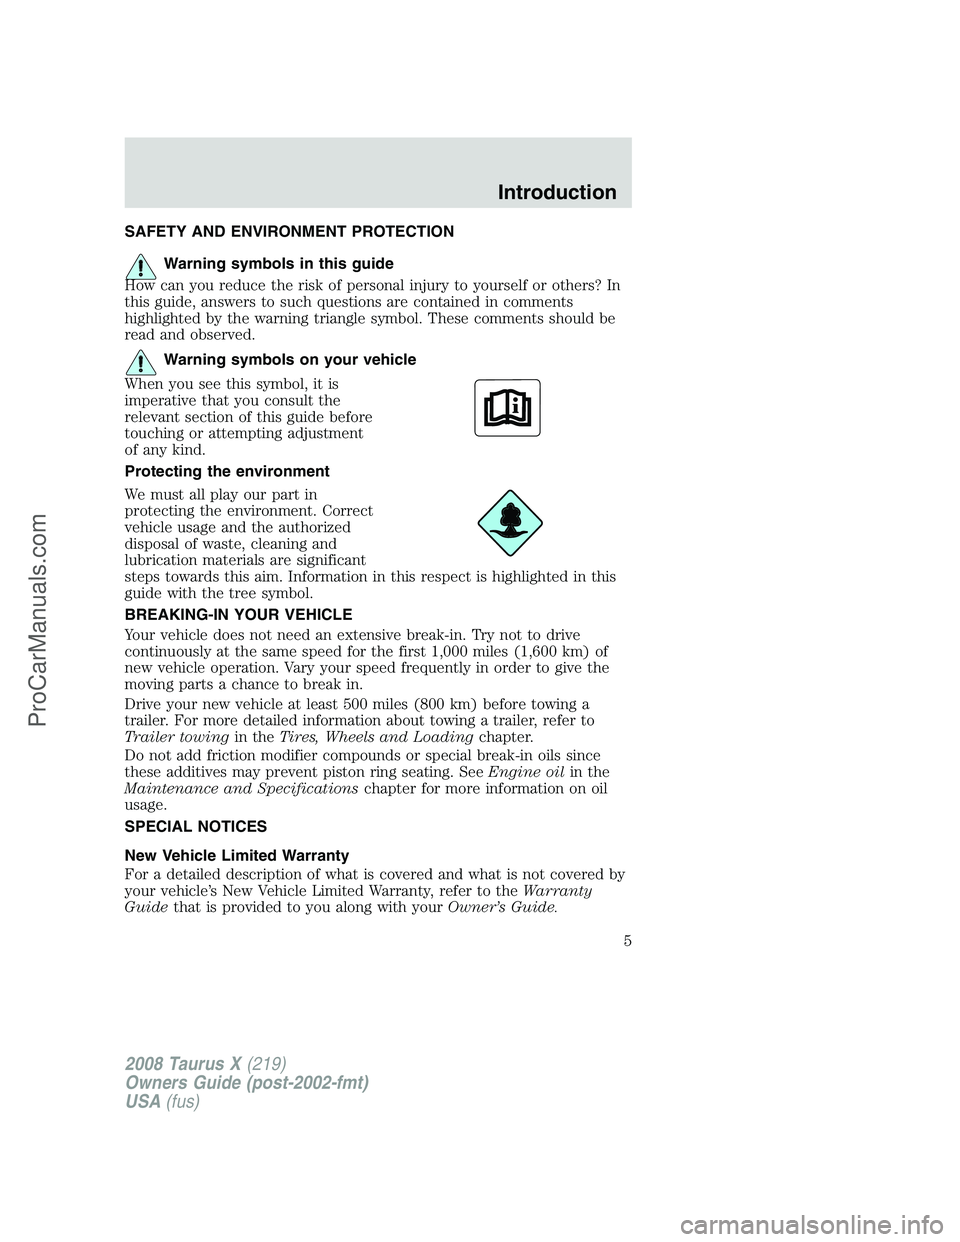 FORD FREESTYLE 2008  Owners Manual SAFETY AND ENVIRONMENT PROTECTION
Warning symbols in this guide
How can you reduce the risk of personal injury to yourself or others? In
this guide, answers to such questions are contained in comments